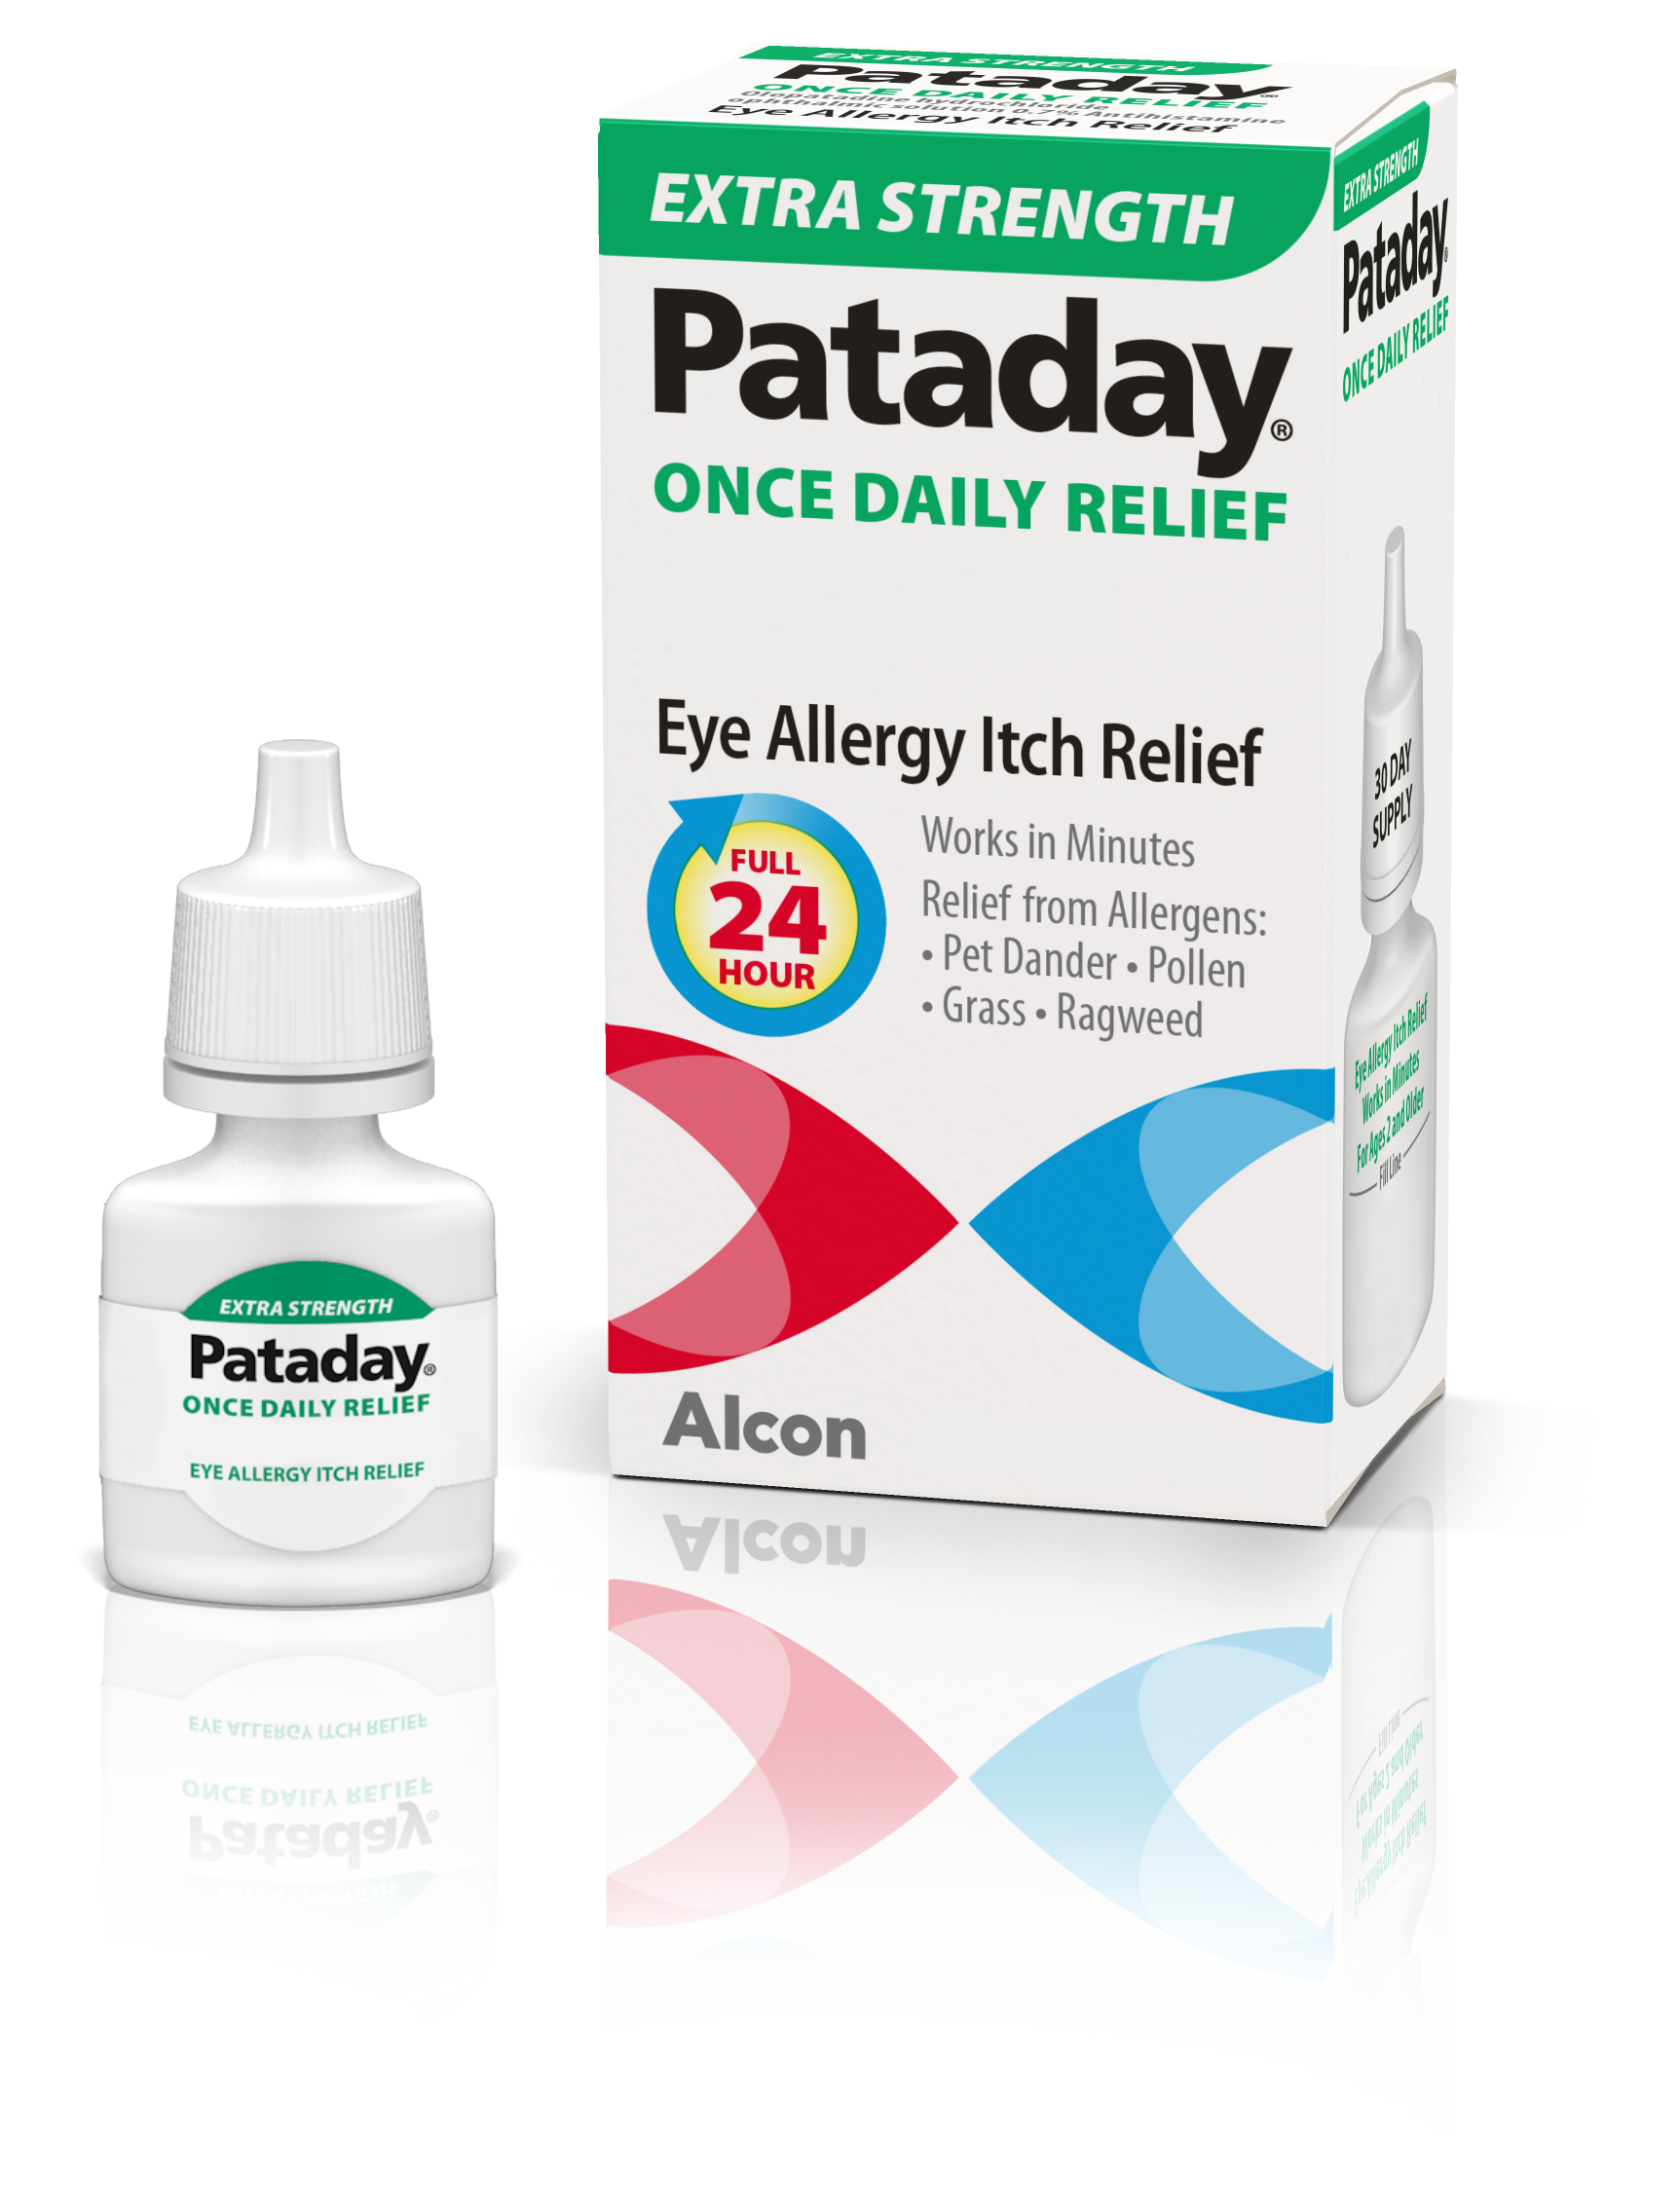 bottle and product box for Extra Strength Pataday eye allergy itch relief drops by Alcon